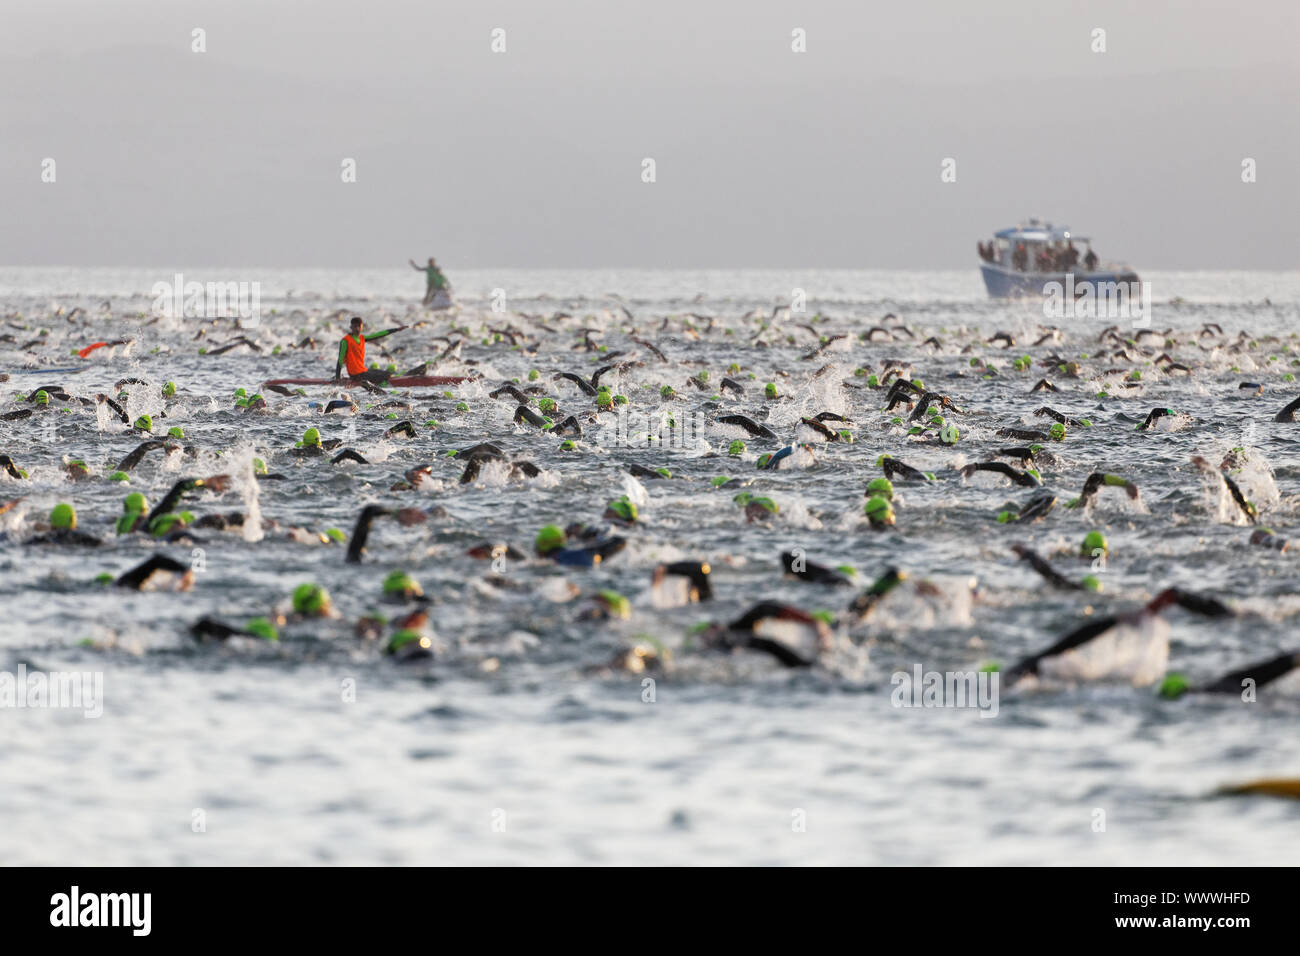 Tenby, UK. 15th Sep, 2019. Pictured: Swimmers set off from the North Beach in Tenby. Sunday 15 September 2019 Re: Ironman triathlon event in Tenby, Wales, UK. Credit: ATHENA PICTURE AGENCY LTD/Alamy Live News Stock Photo